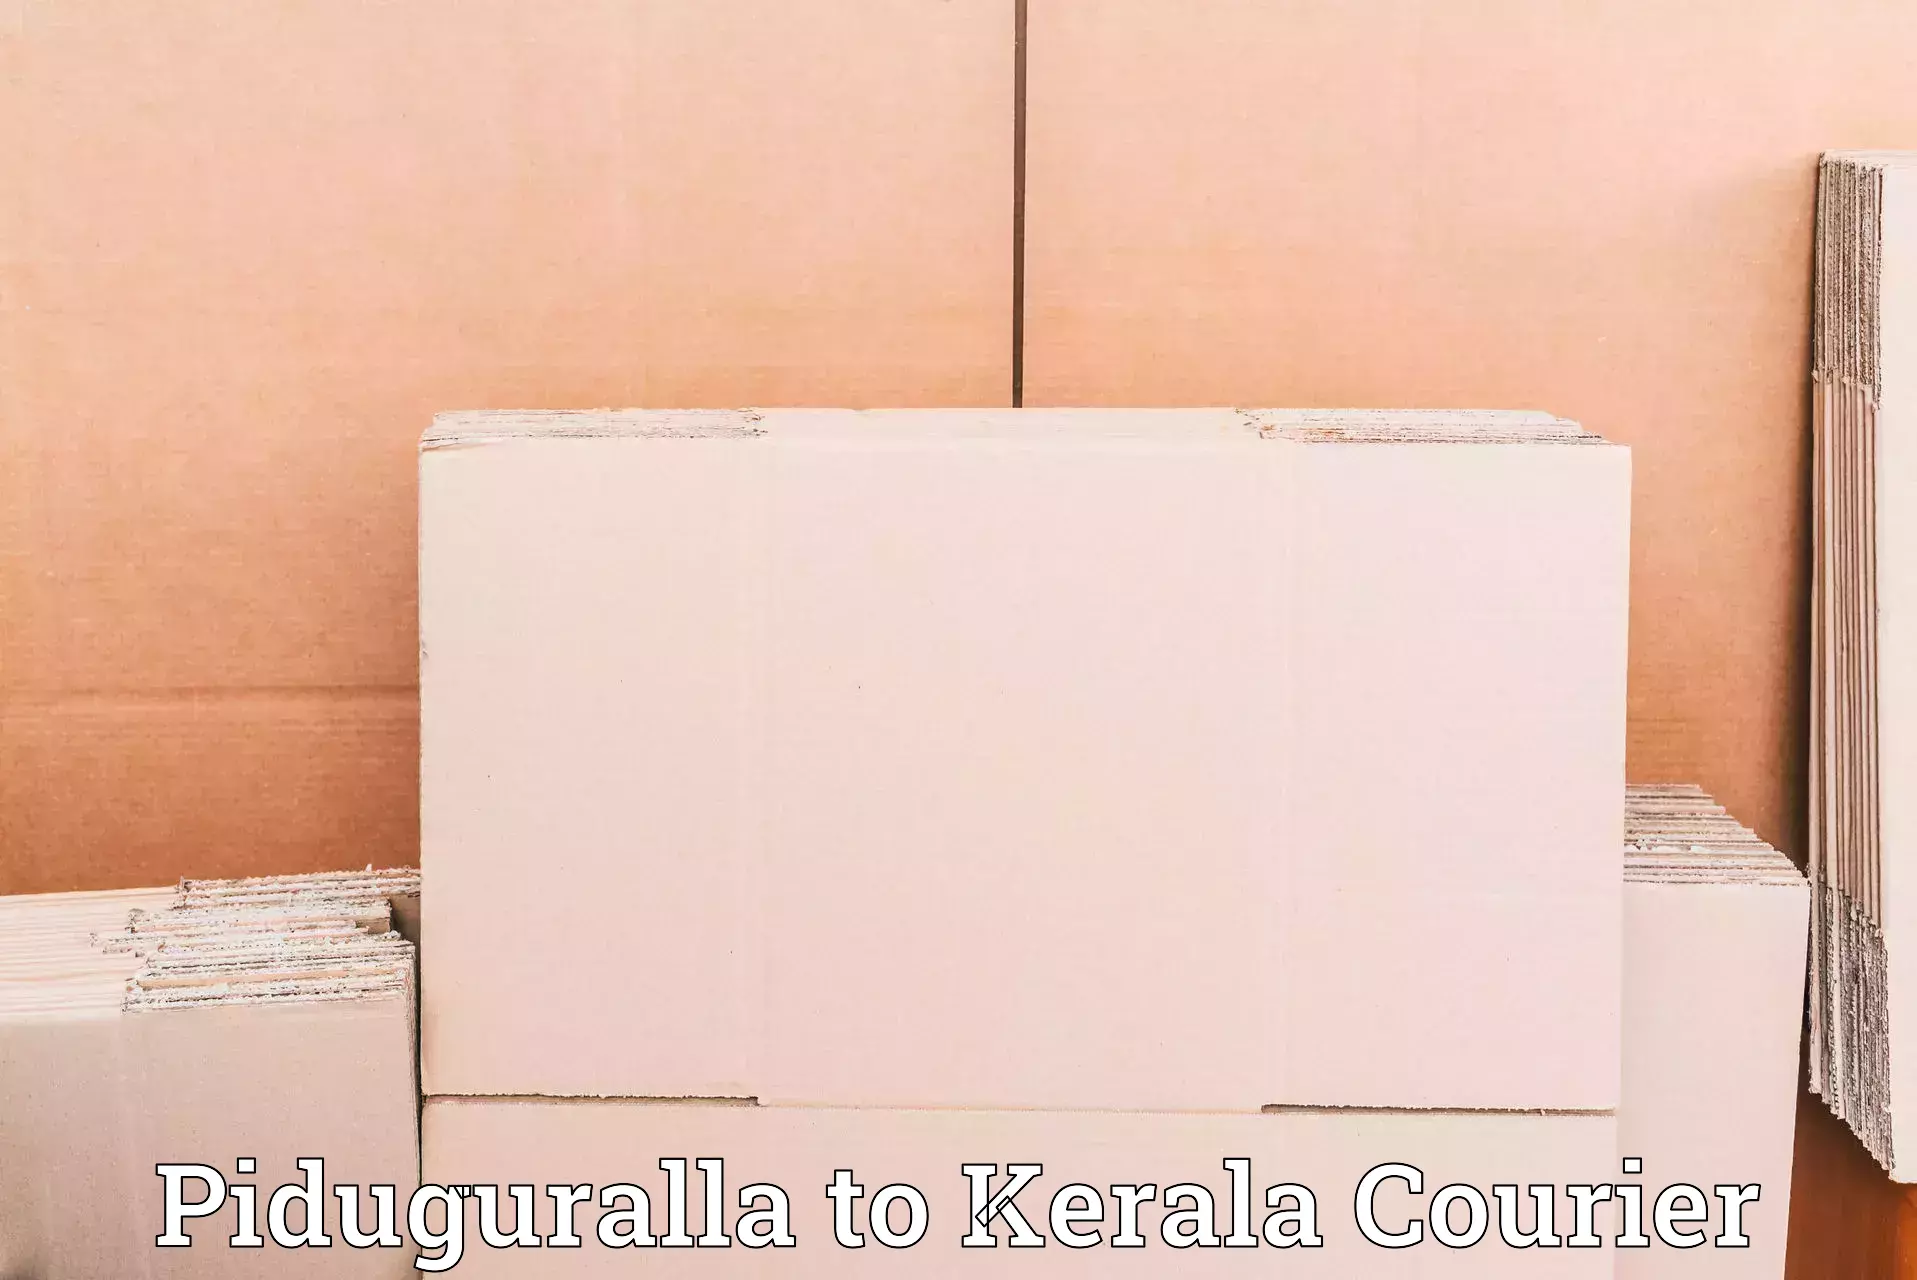 Multi-national courier services Piduguralla to Pathanamthitta